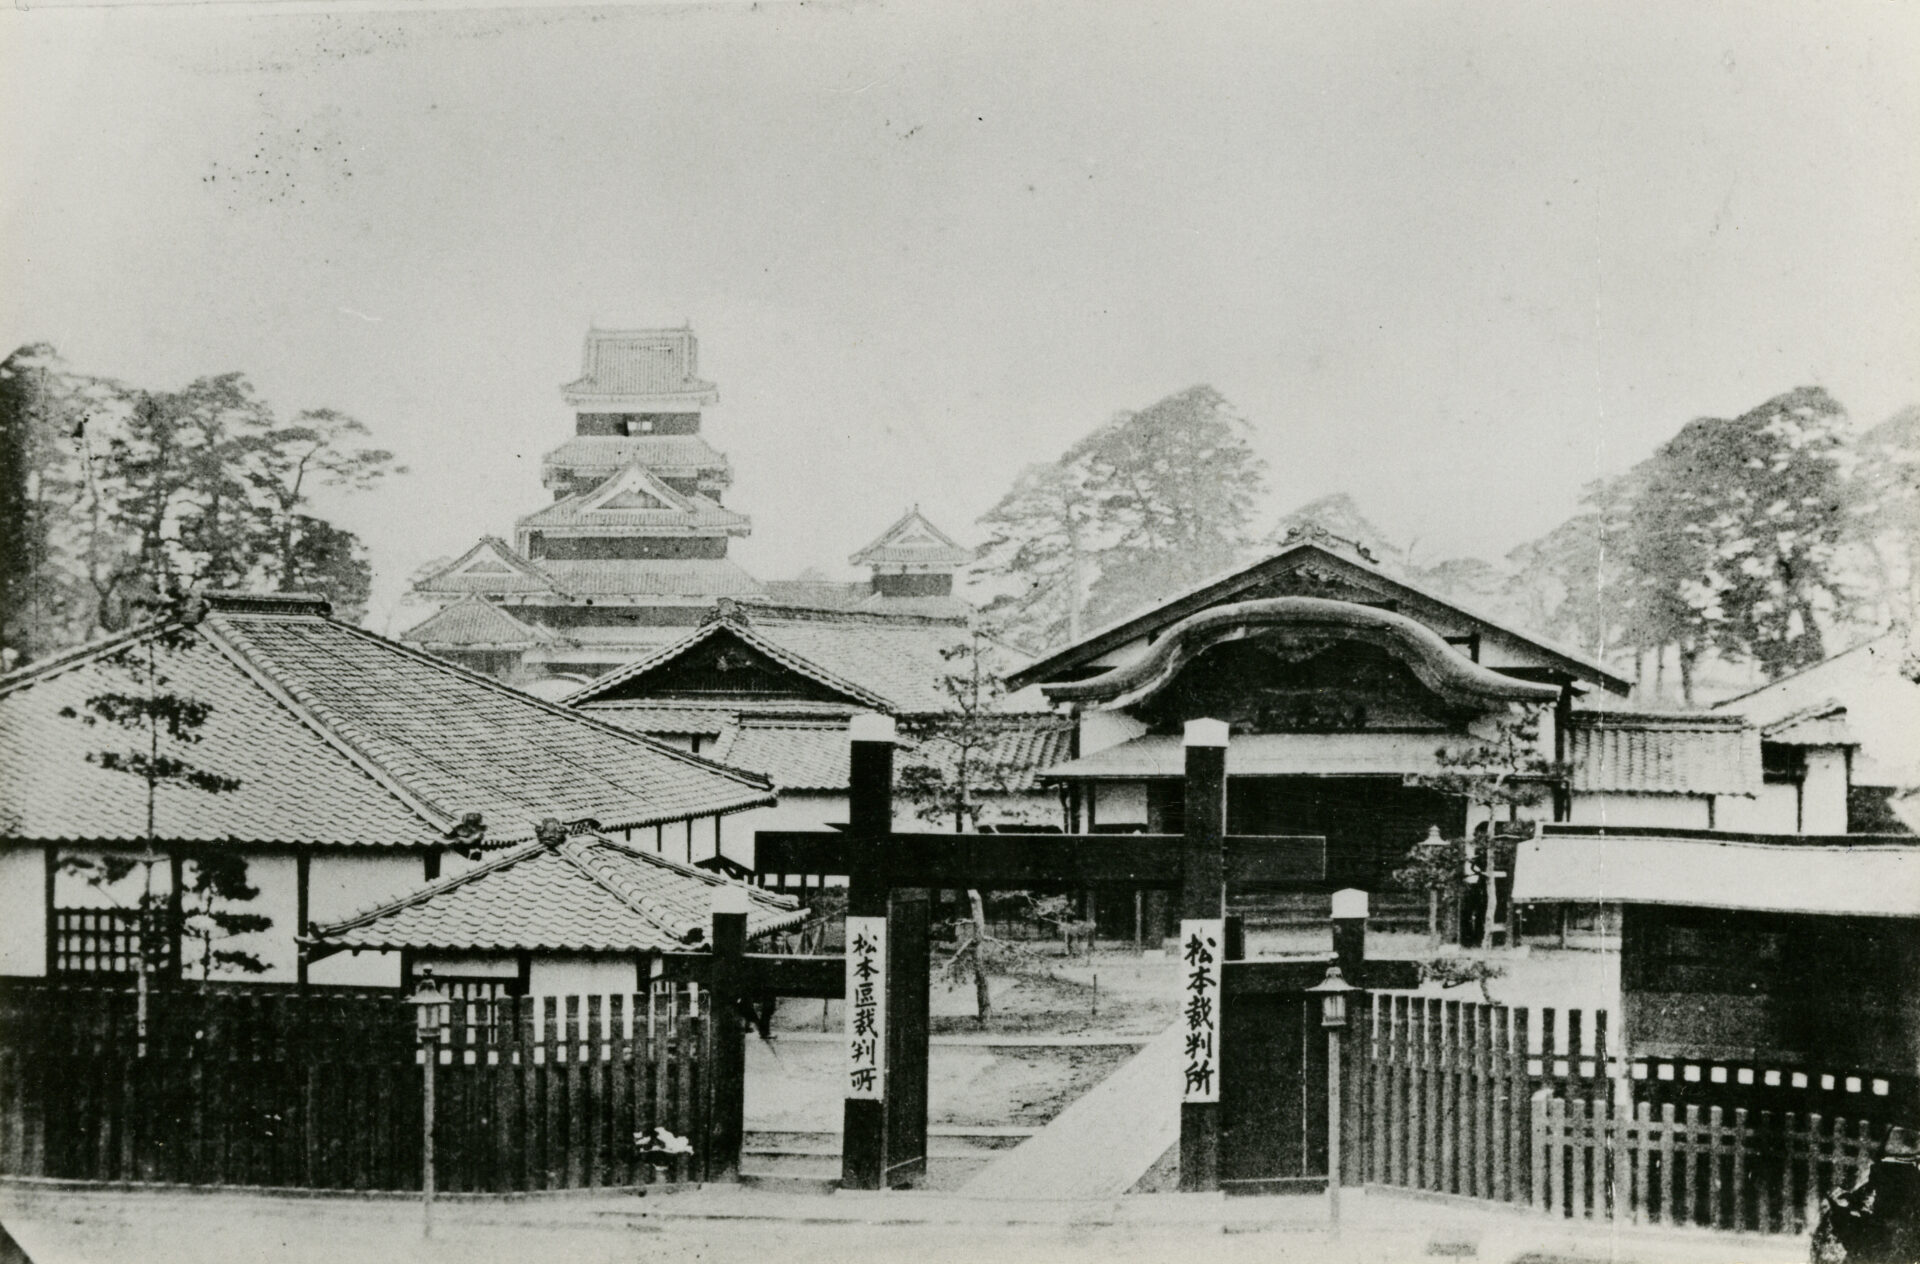 The courthouse built in the palace in the Meiji era